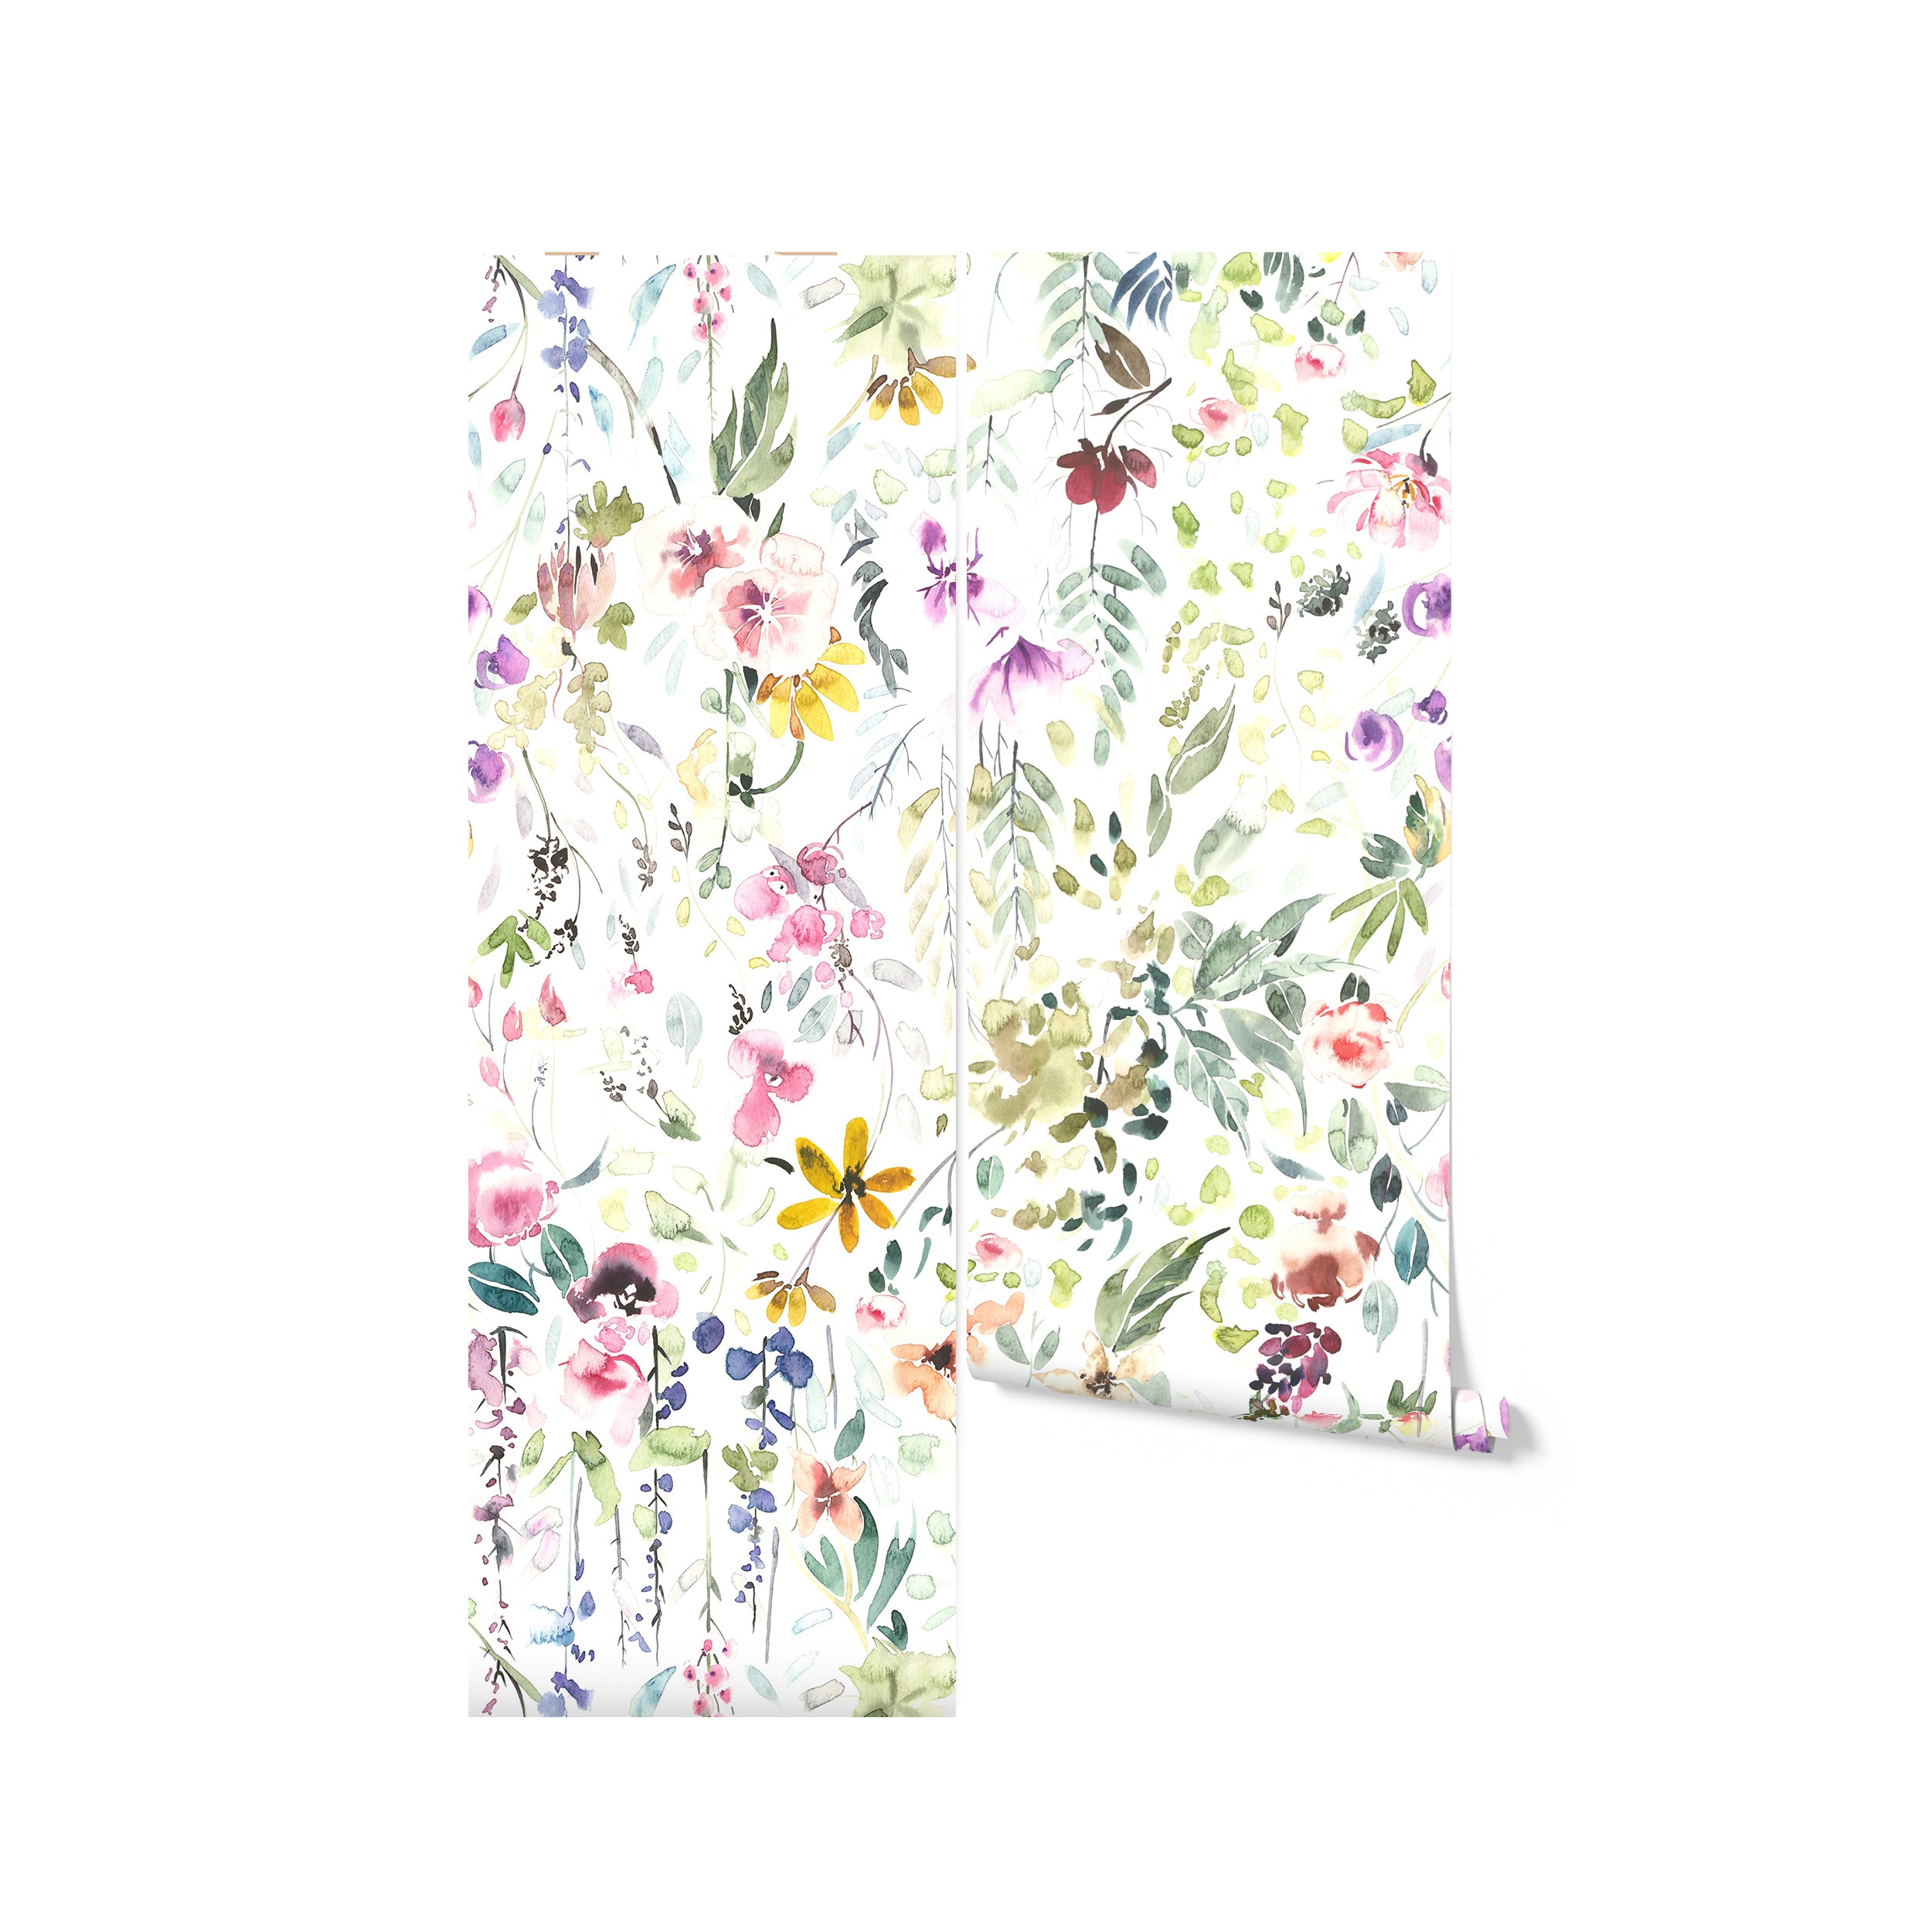 A roll of Hera's Floral Wallpaper, partially unrolled to reveal the exquisitely detailed floral design. This wallpaper features a lush mix of colorful flowers and foliage, perfect for adding vibrancy and a touch of nature to any room.